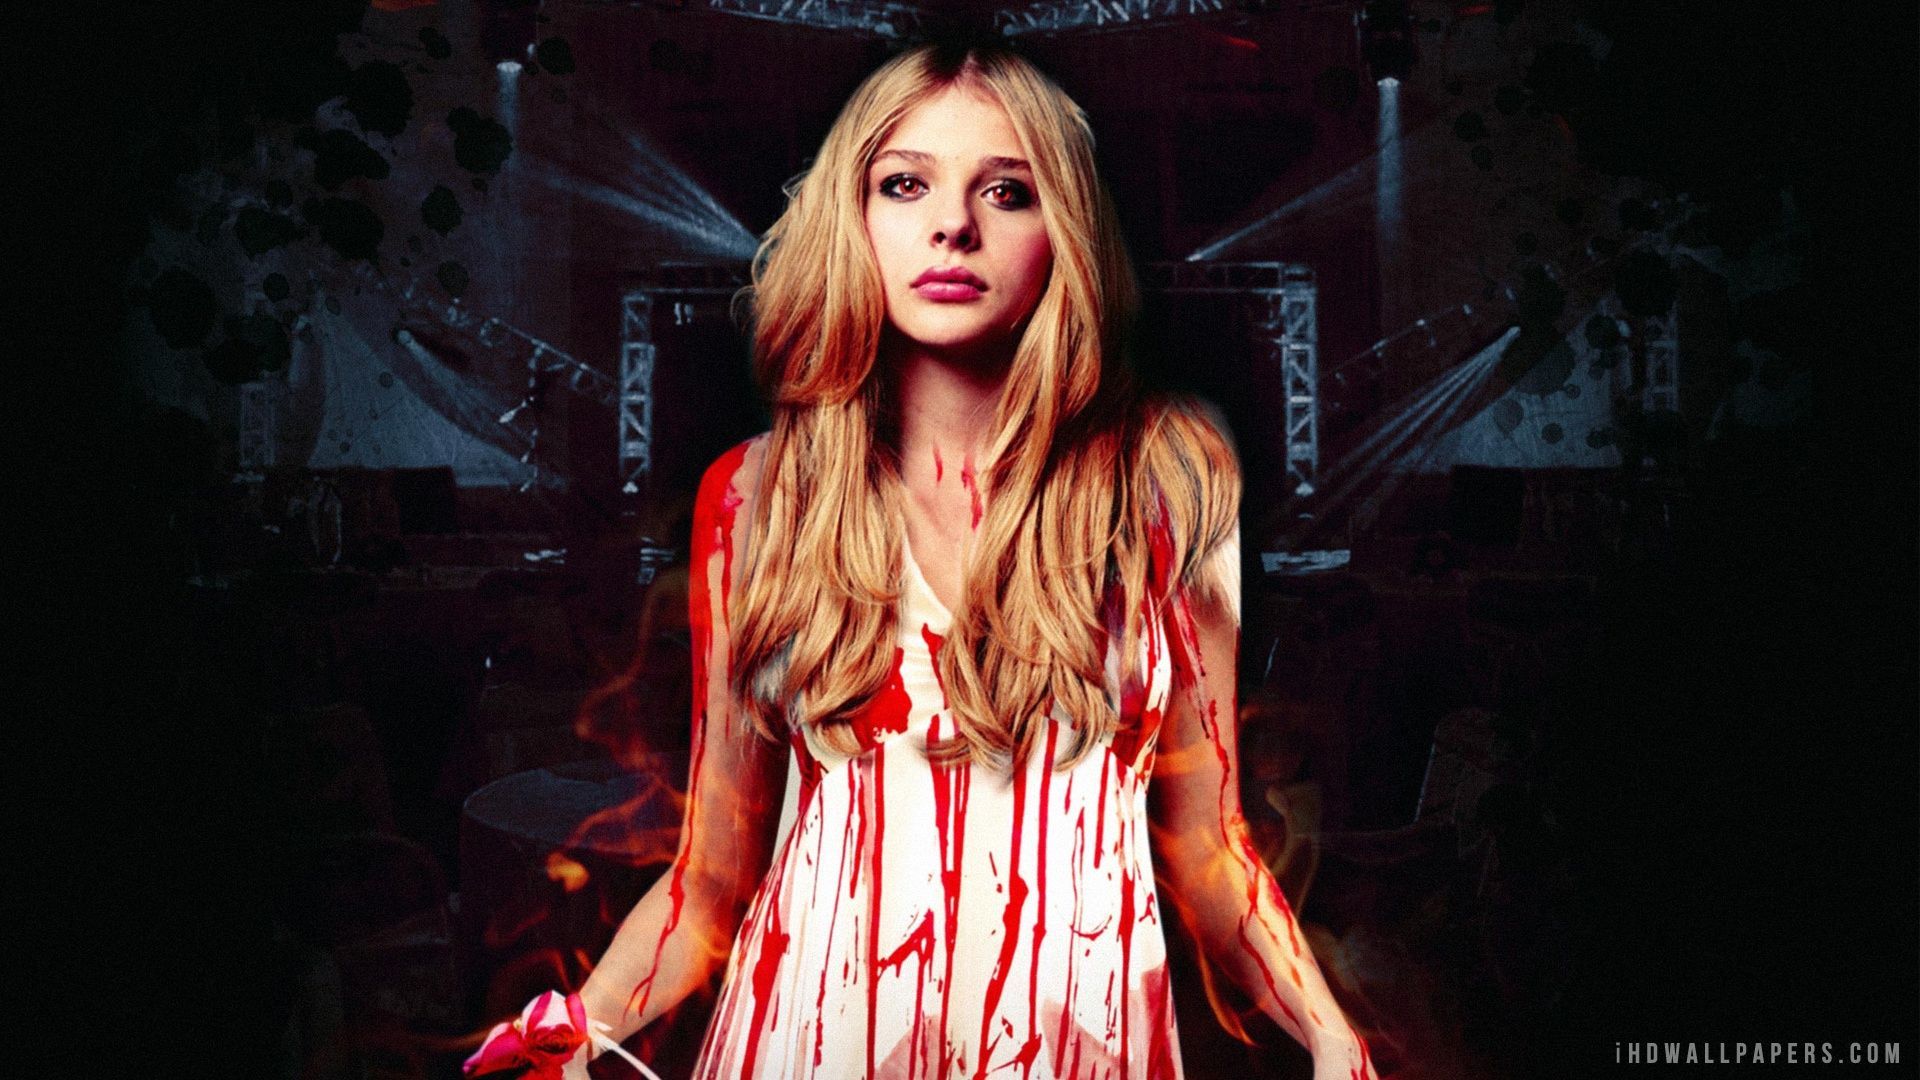 The Action Horror Film SHADOW IN THE CLOUD Will Star Chloe Grace Moretz